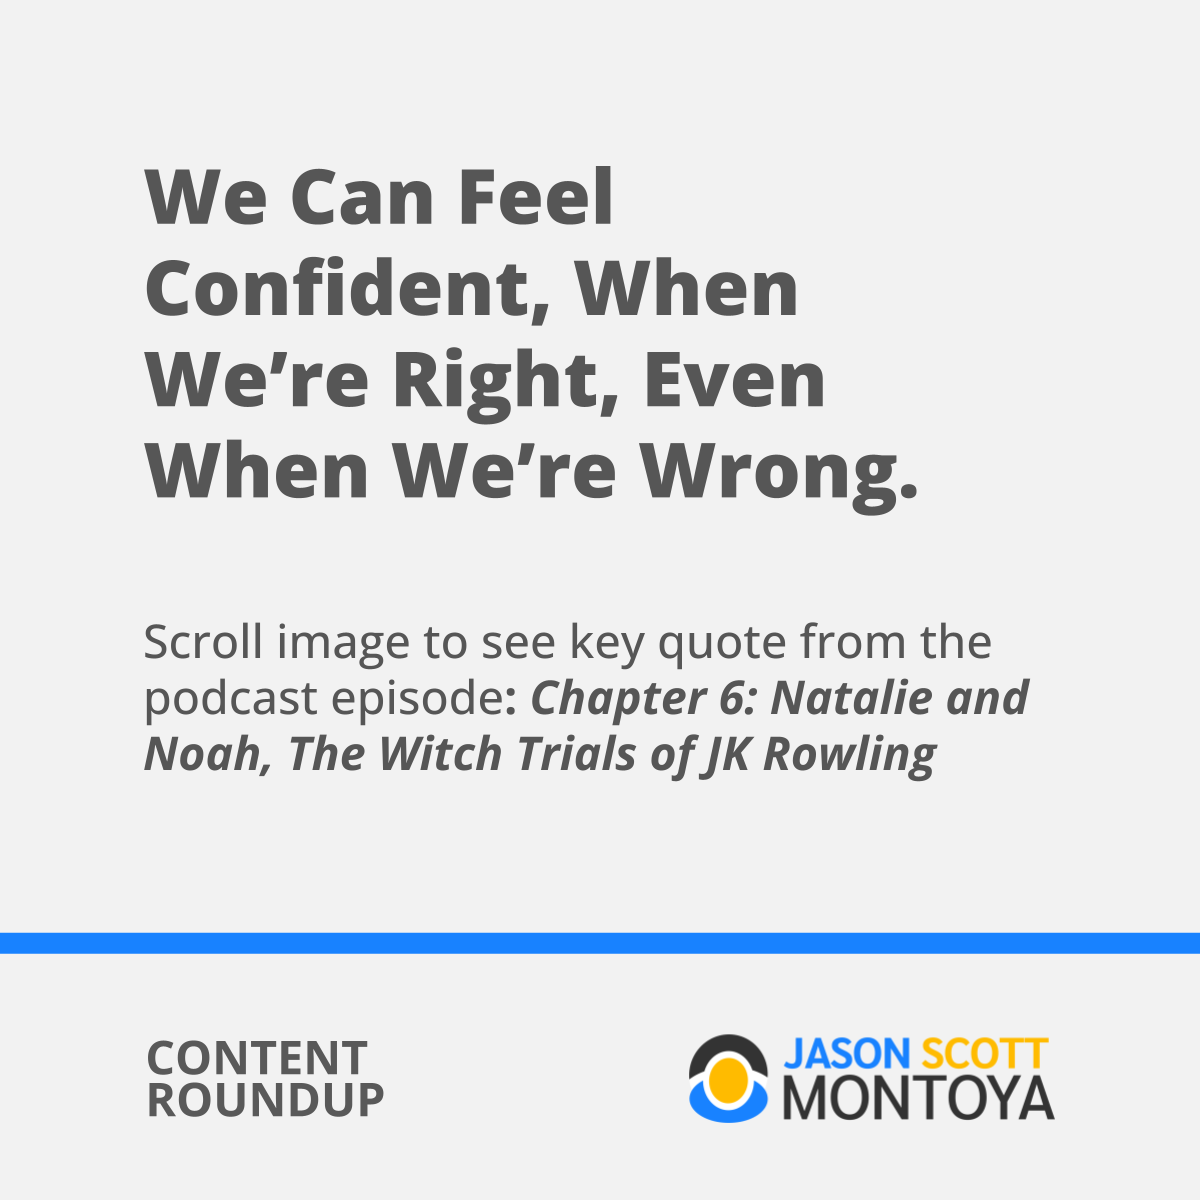 We Can Feel Confident, When We’re Right, Even When We’re Wrong.  Scroll image to see key quote from the podcast episode: Chapter 6: Natalie and Noah, The Witch Trials of JK Rowling